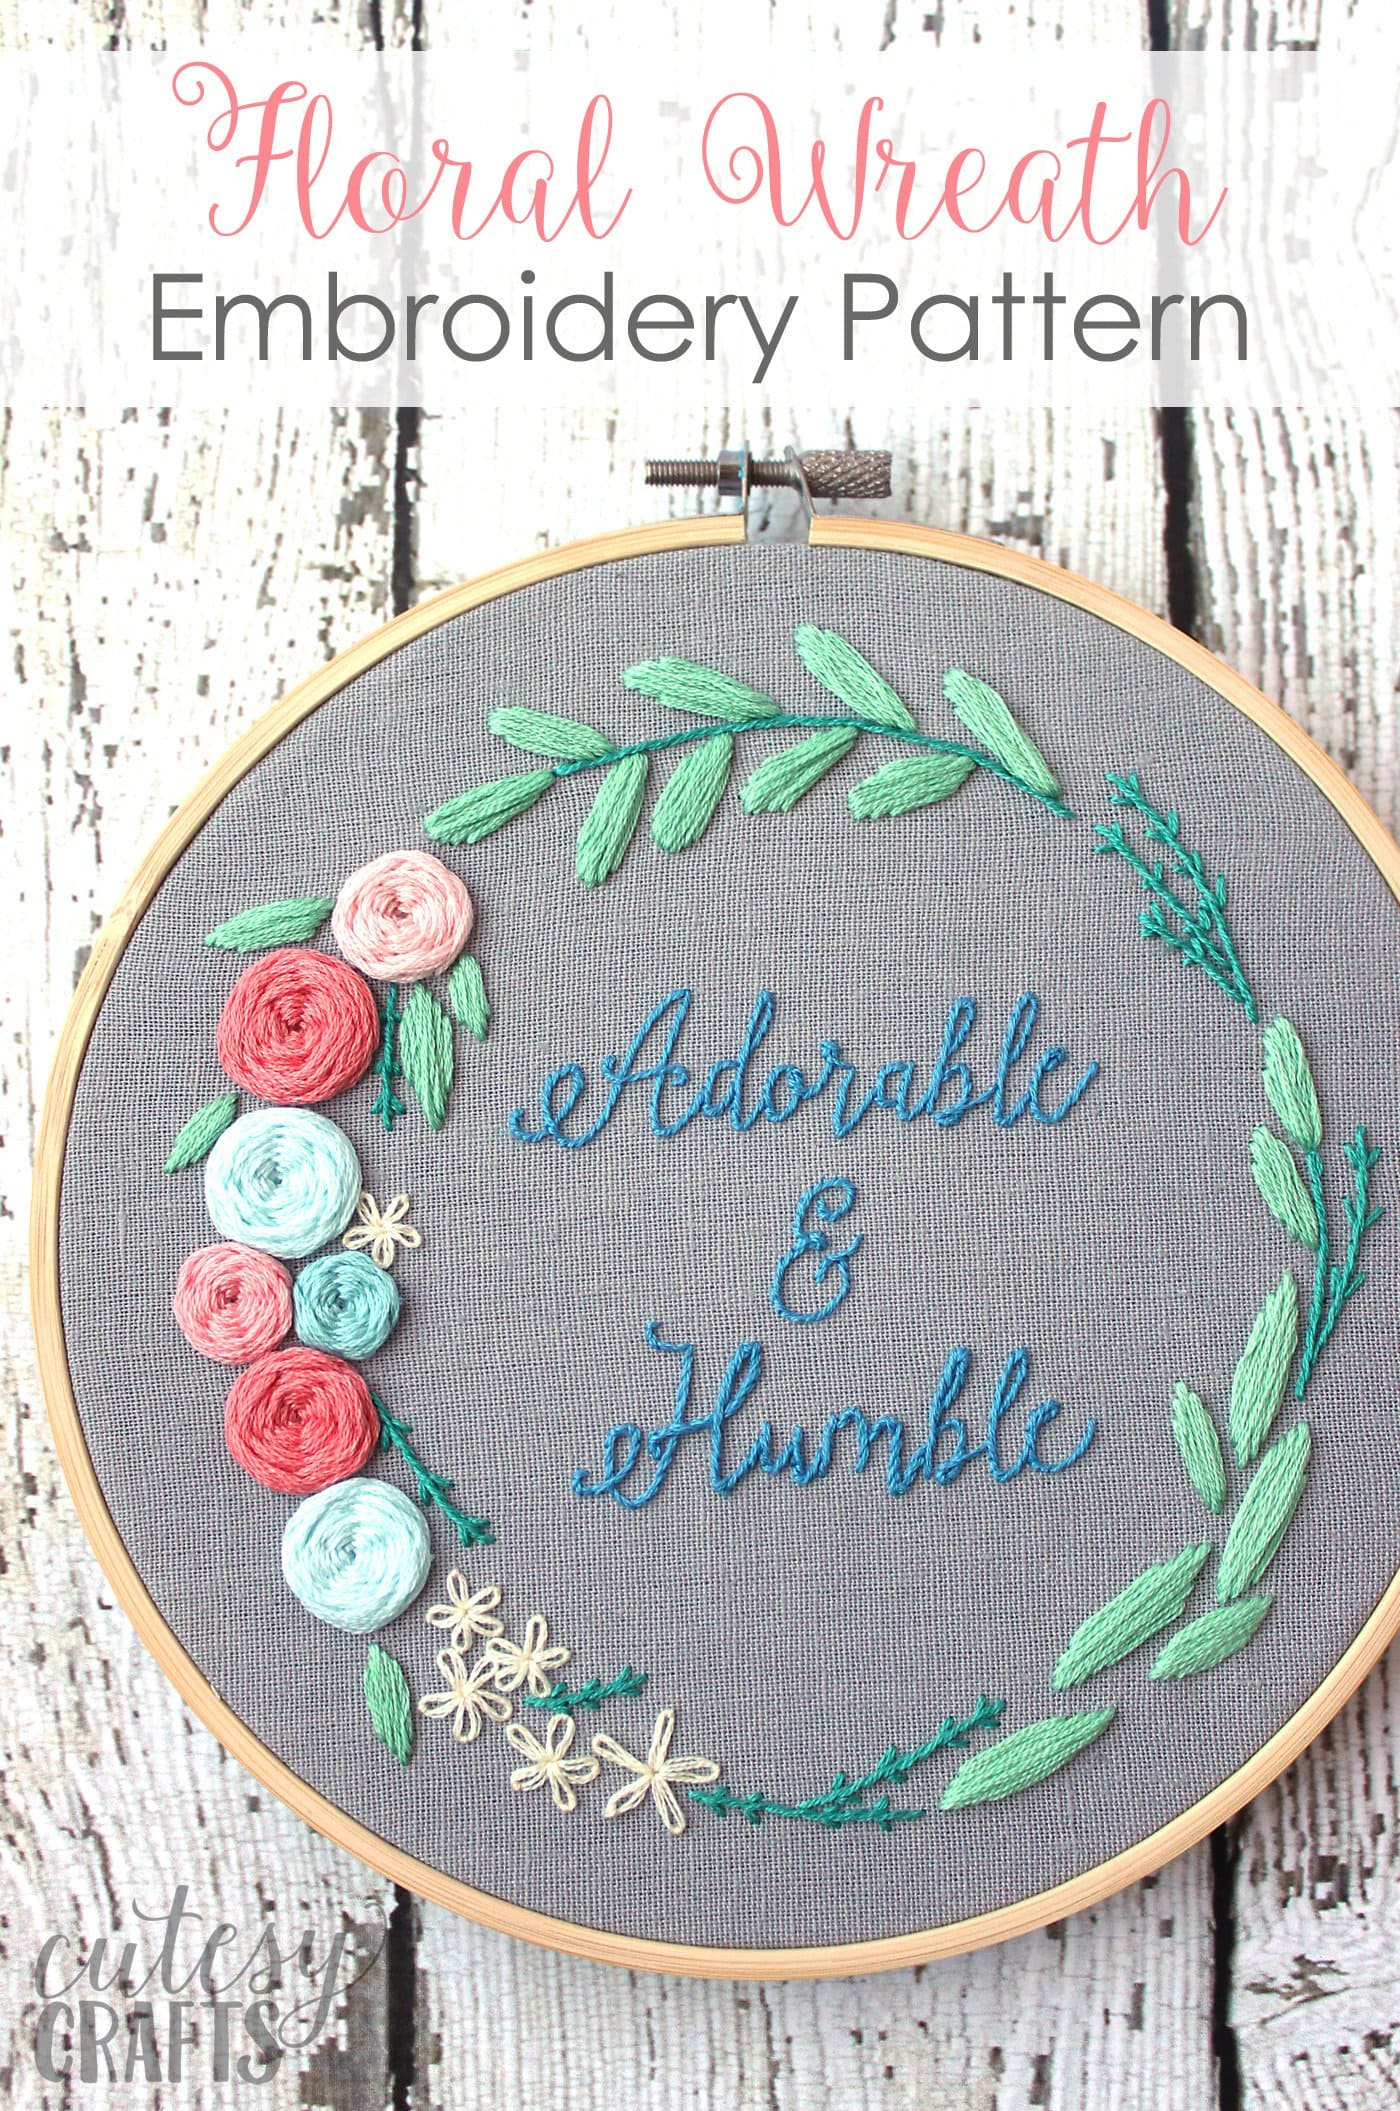 Hand Embroidery Patterns Free Adorable And Humble Free Floral Wreath Hand Embroidery Pattern